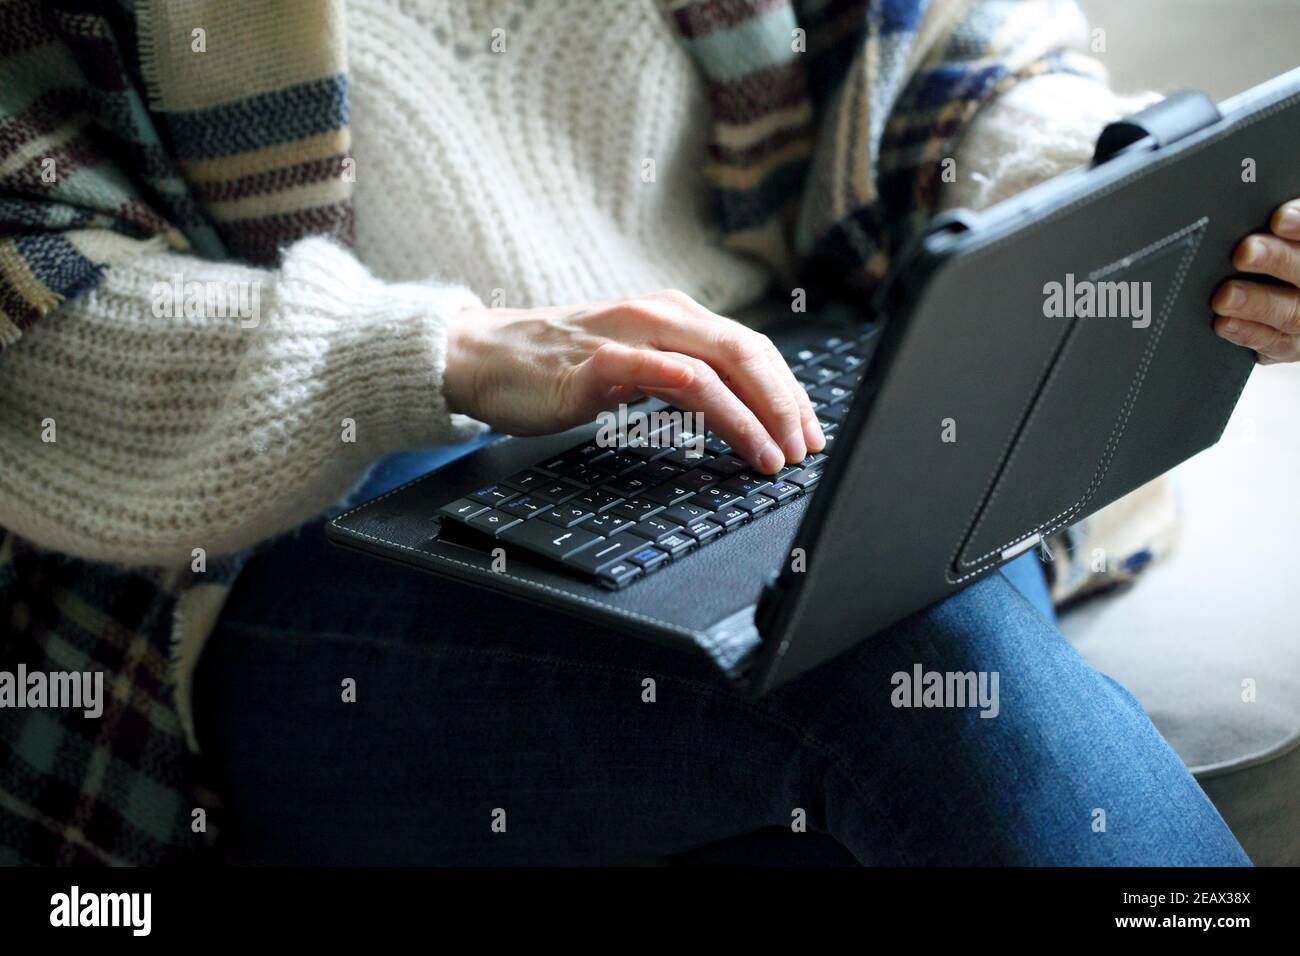 Closeup shot of a woman typing on a laptop in her lap Stock Photo